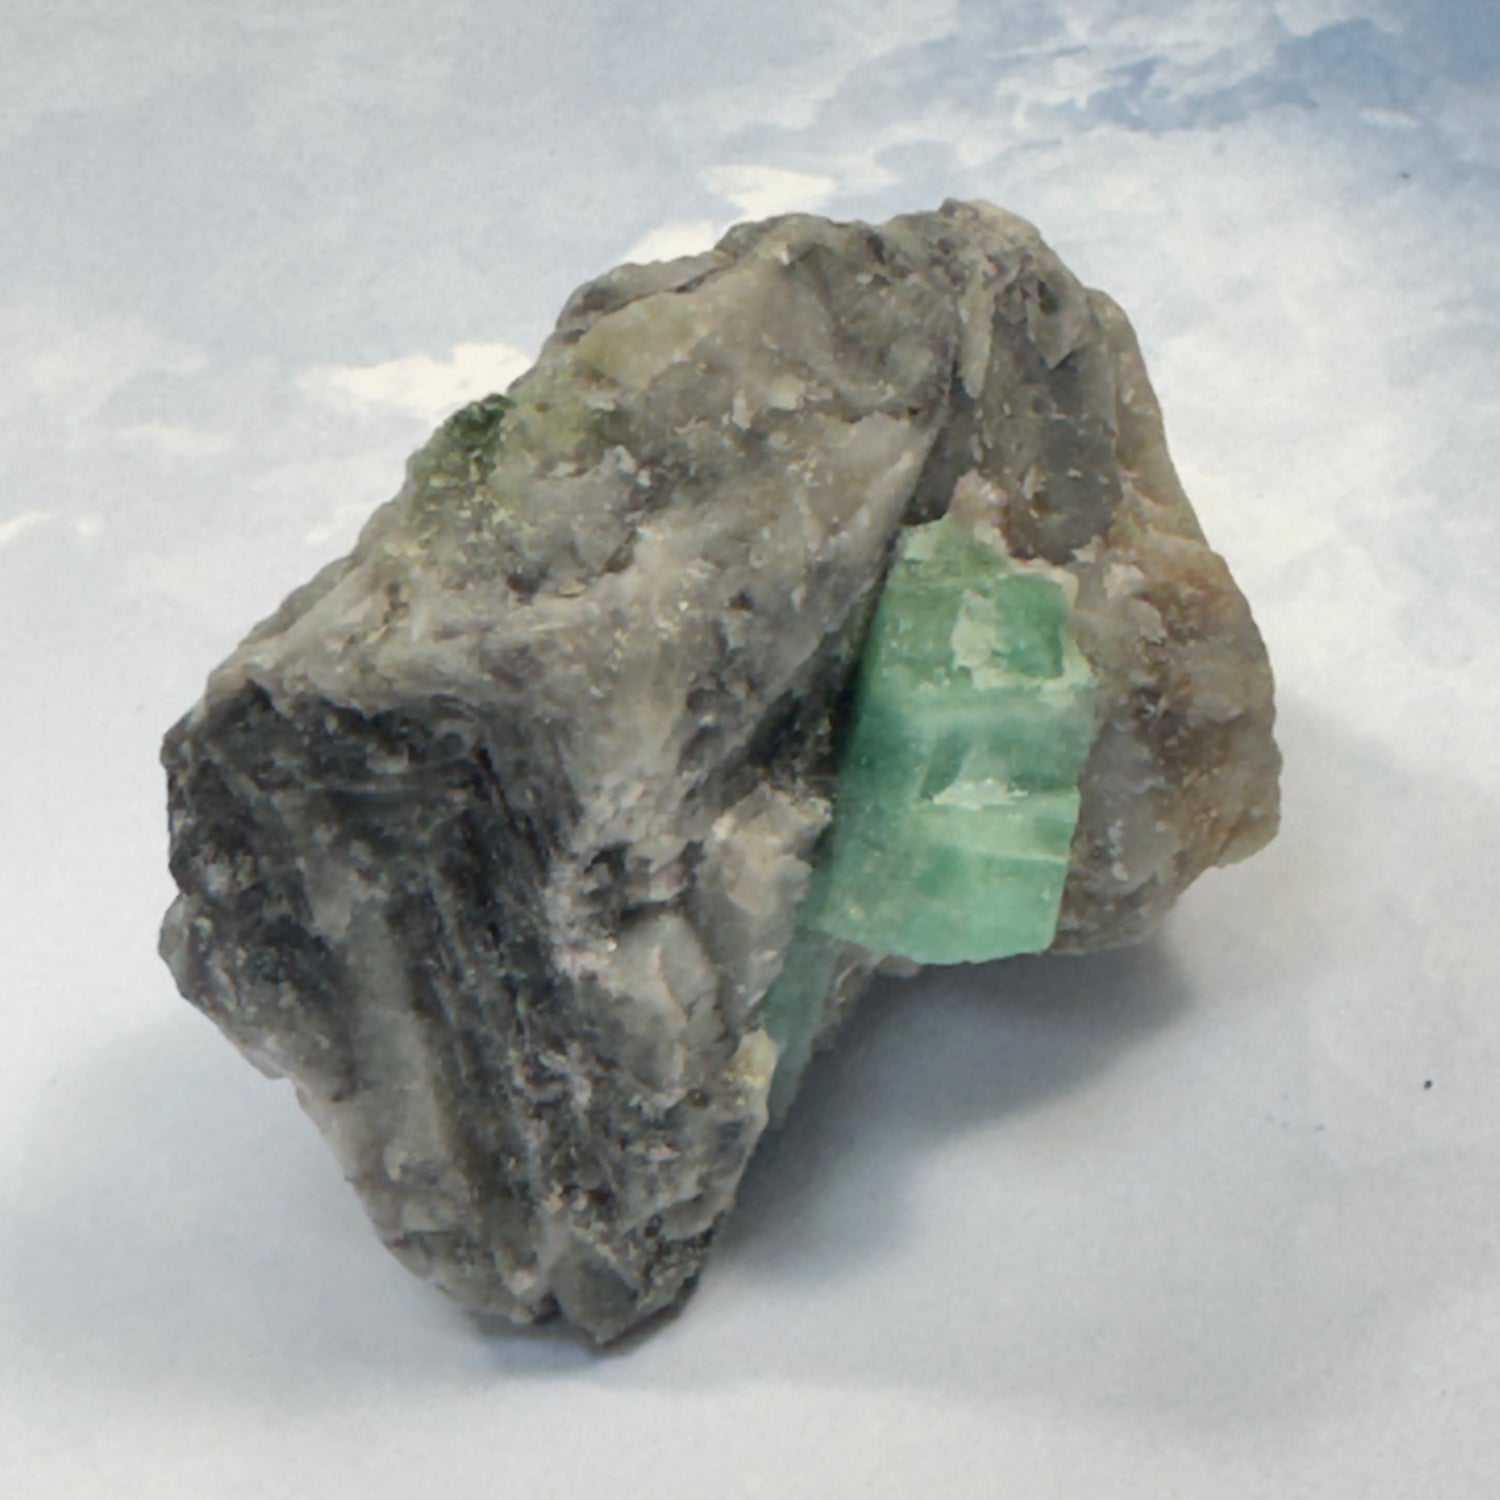 A video of a piece of natural real rough green emerald from Brazil